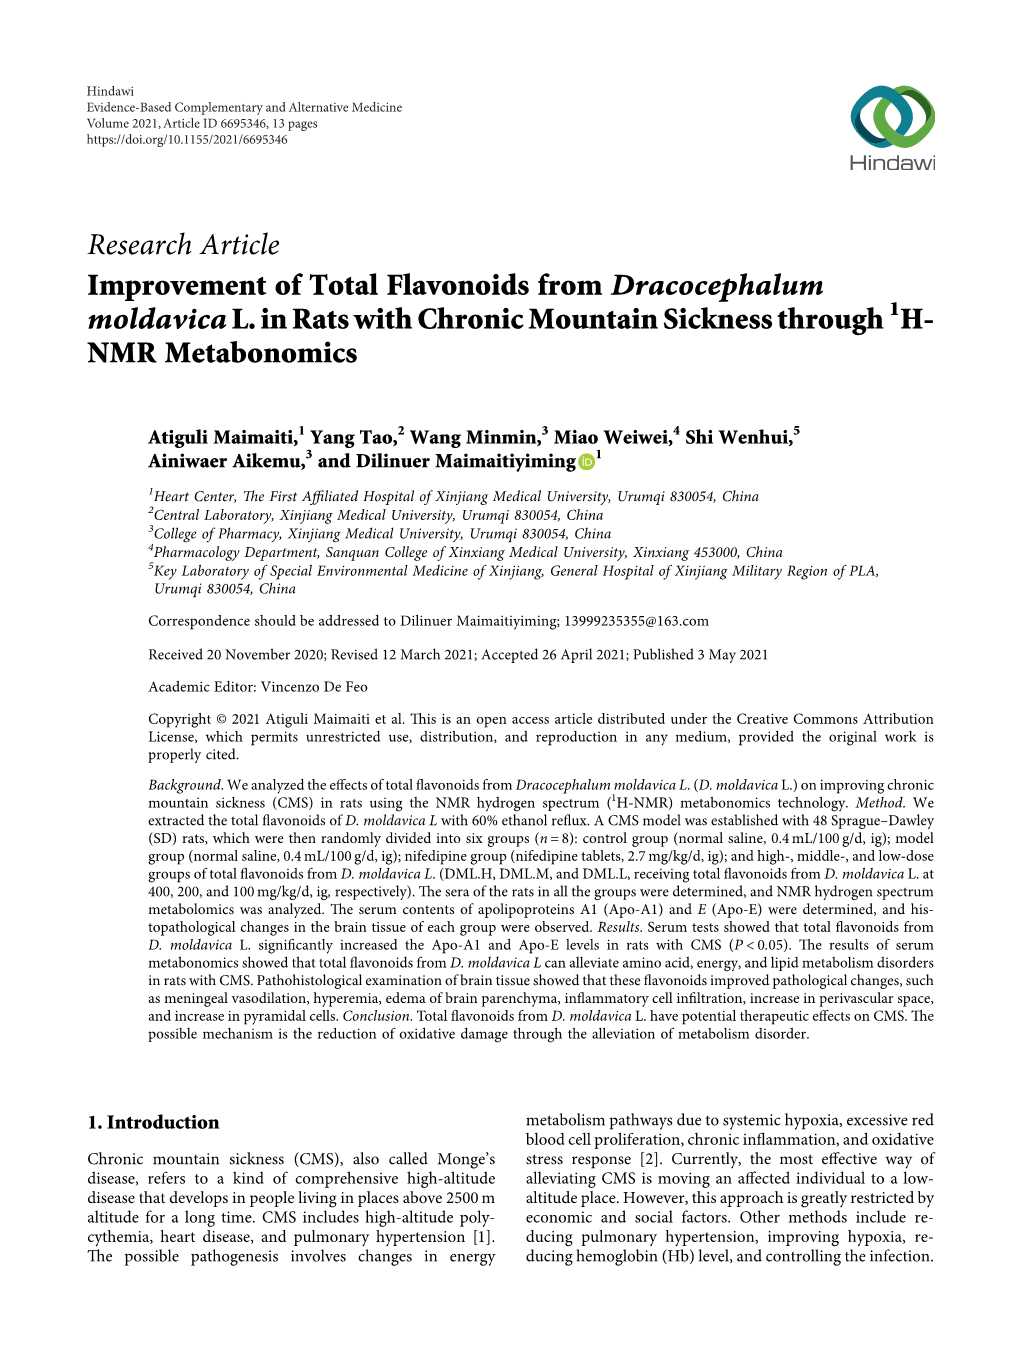 Improvement of Total Flavonoids from Dracocephalum Moldavica L. in Rats with Chronic Mountain Sickness Through 1H- NMR Metabonomics